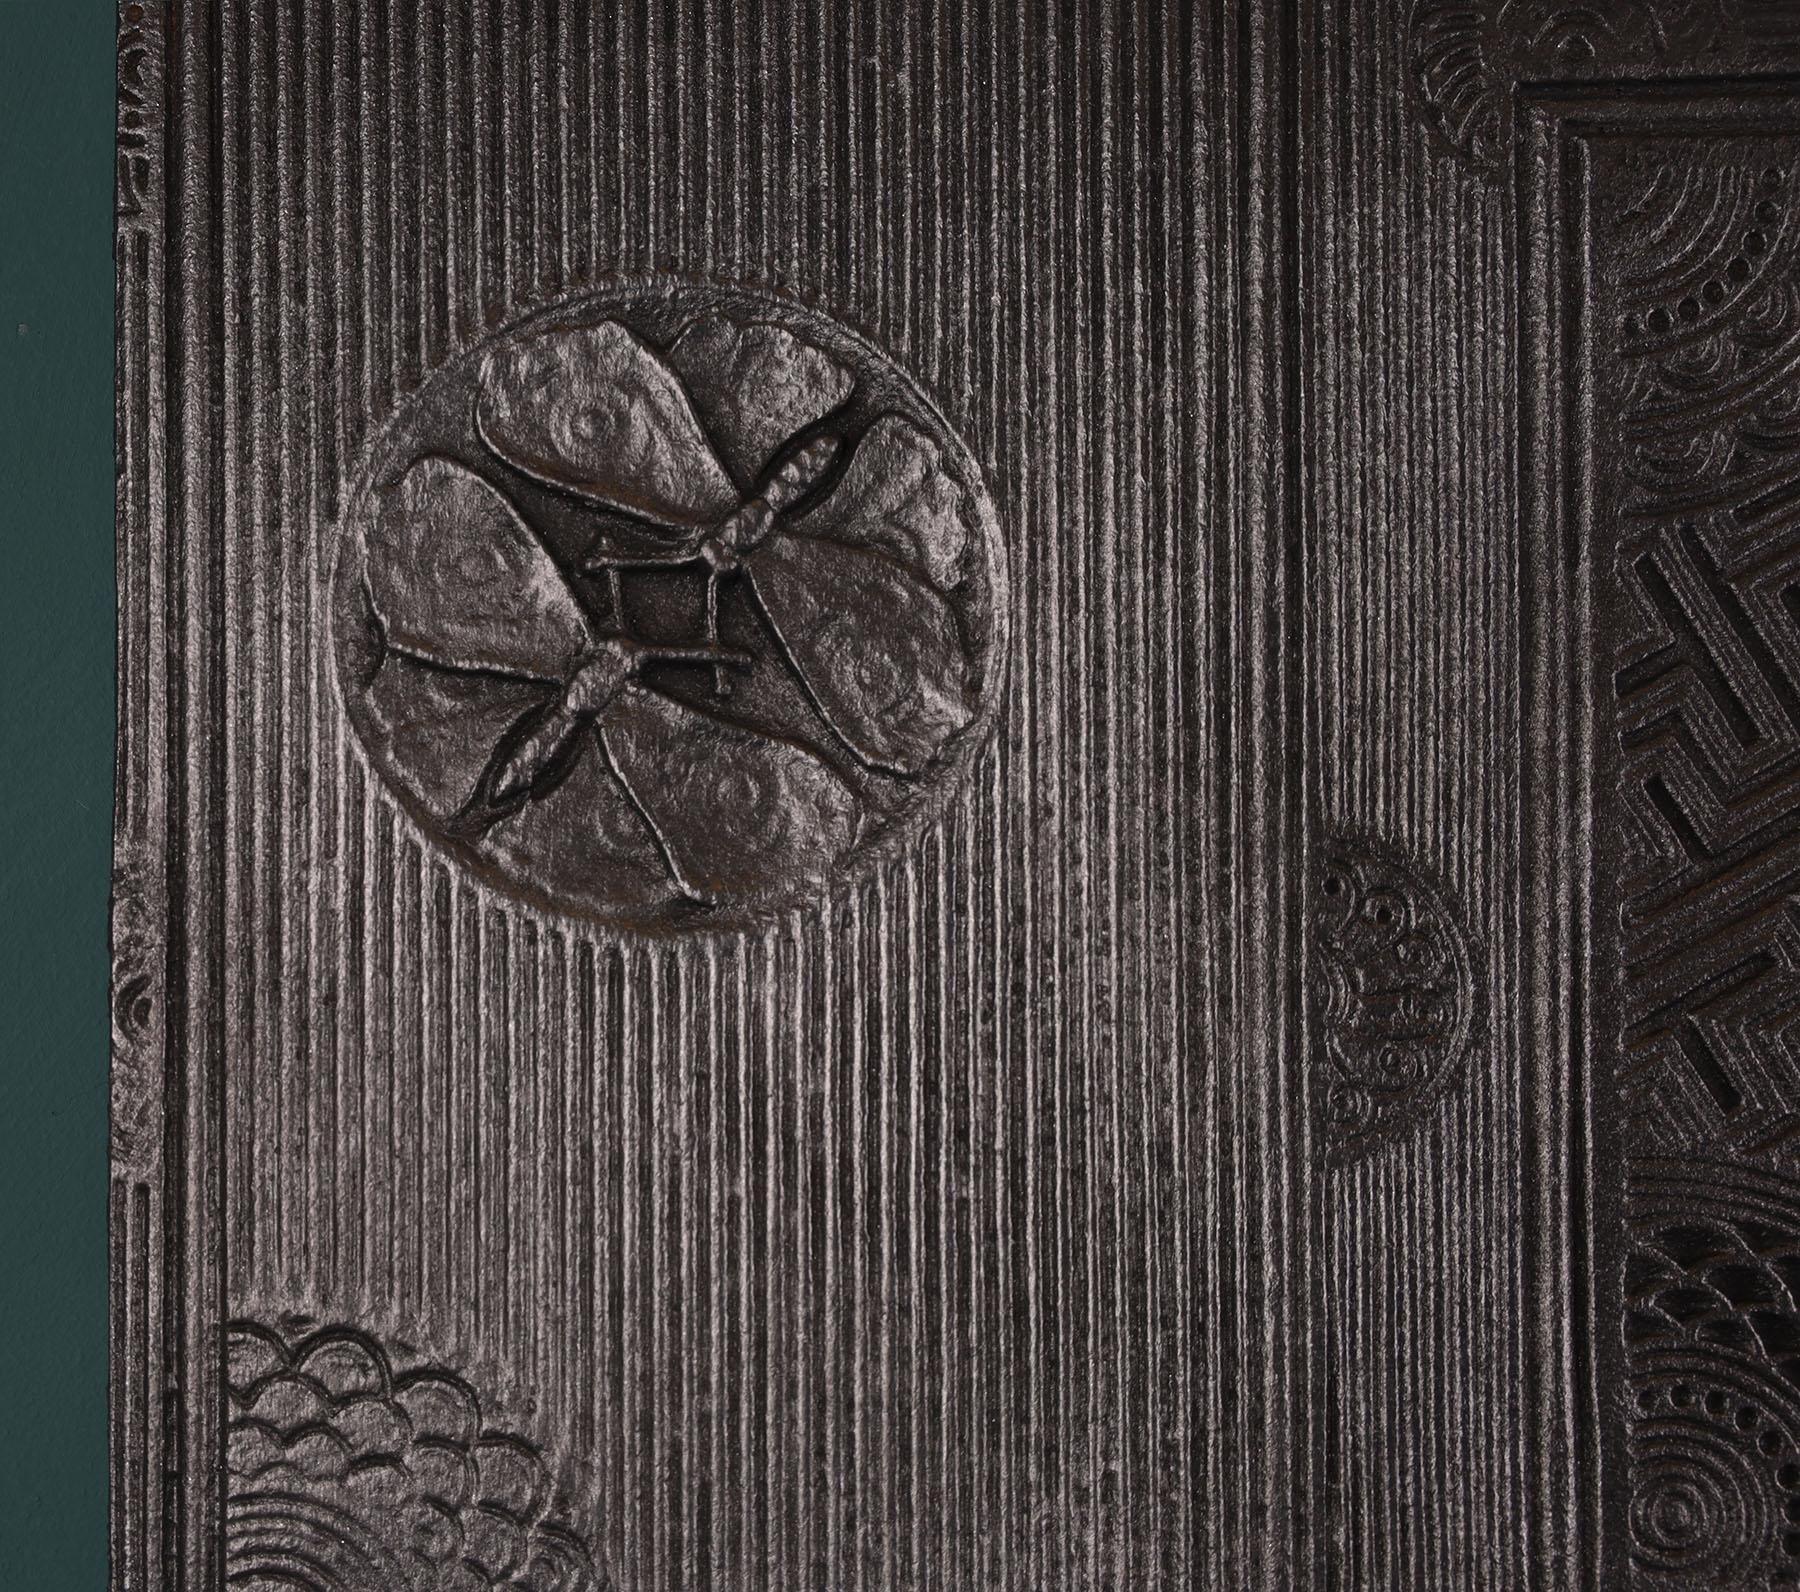 From the foundry of Barnard, Bishop and Barnards, this Thomas Jeckyll register grate represents the very highest quality in Fine casting. This asymmetric floral design is typical of Jeckyll and gives a hand-built character to this early mass